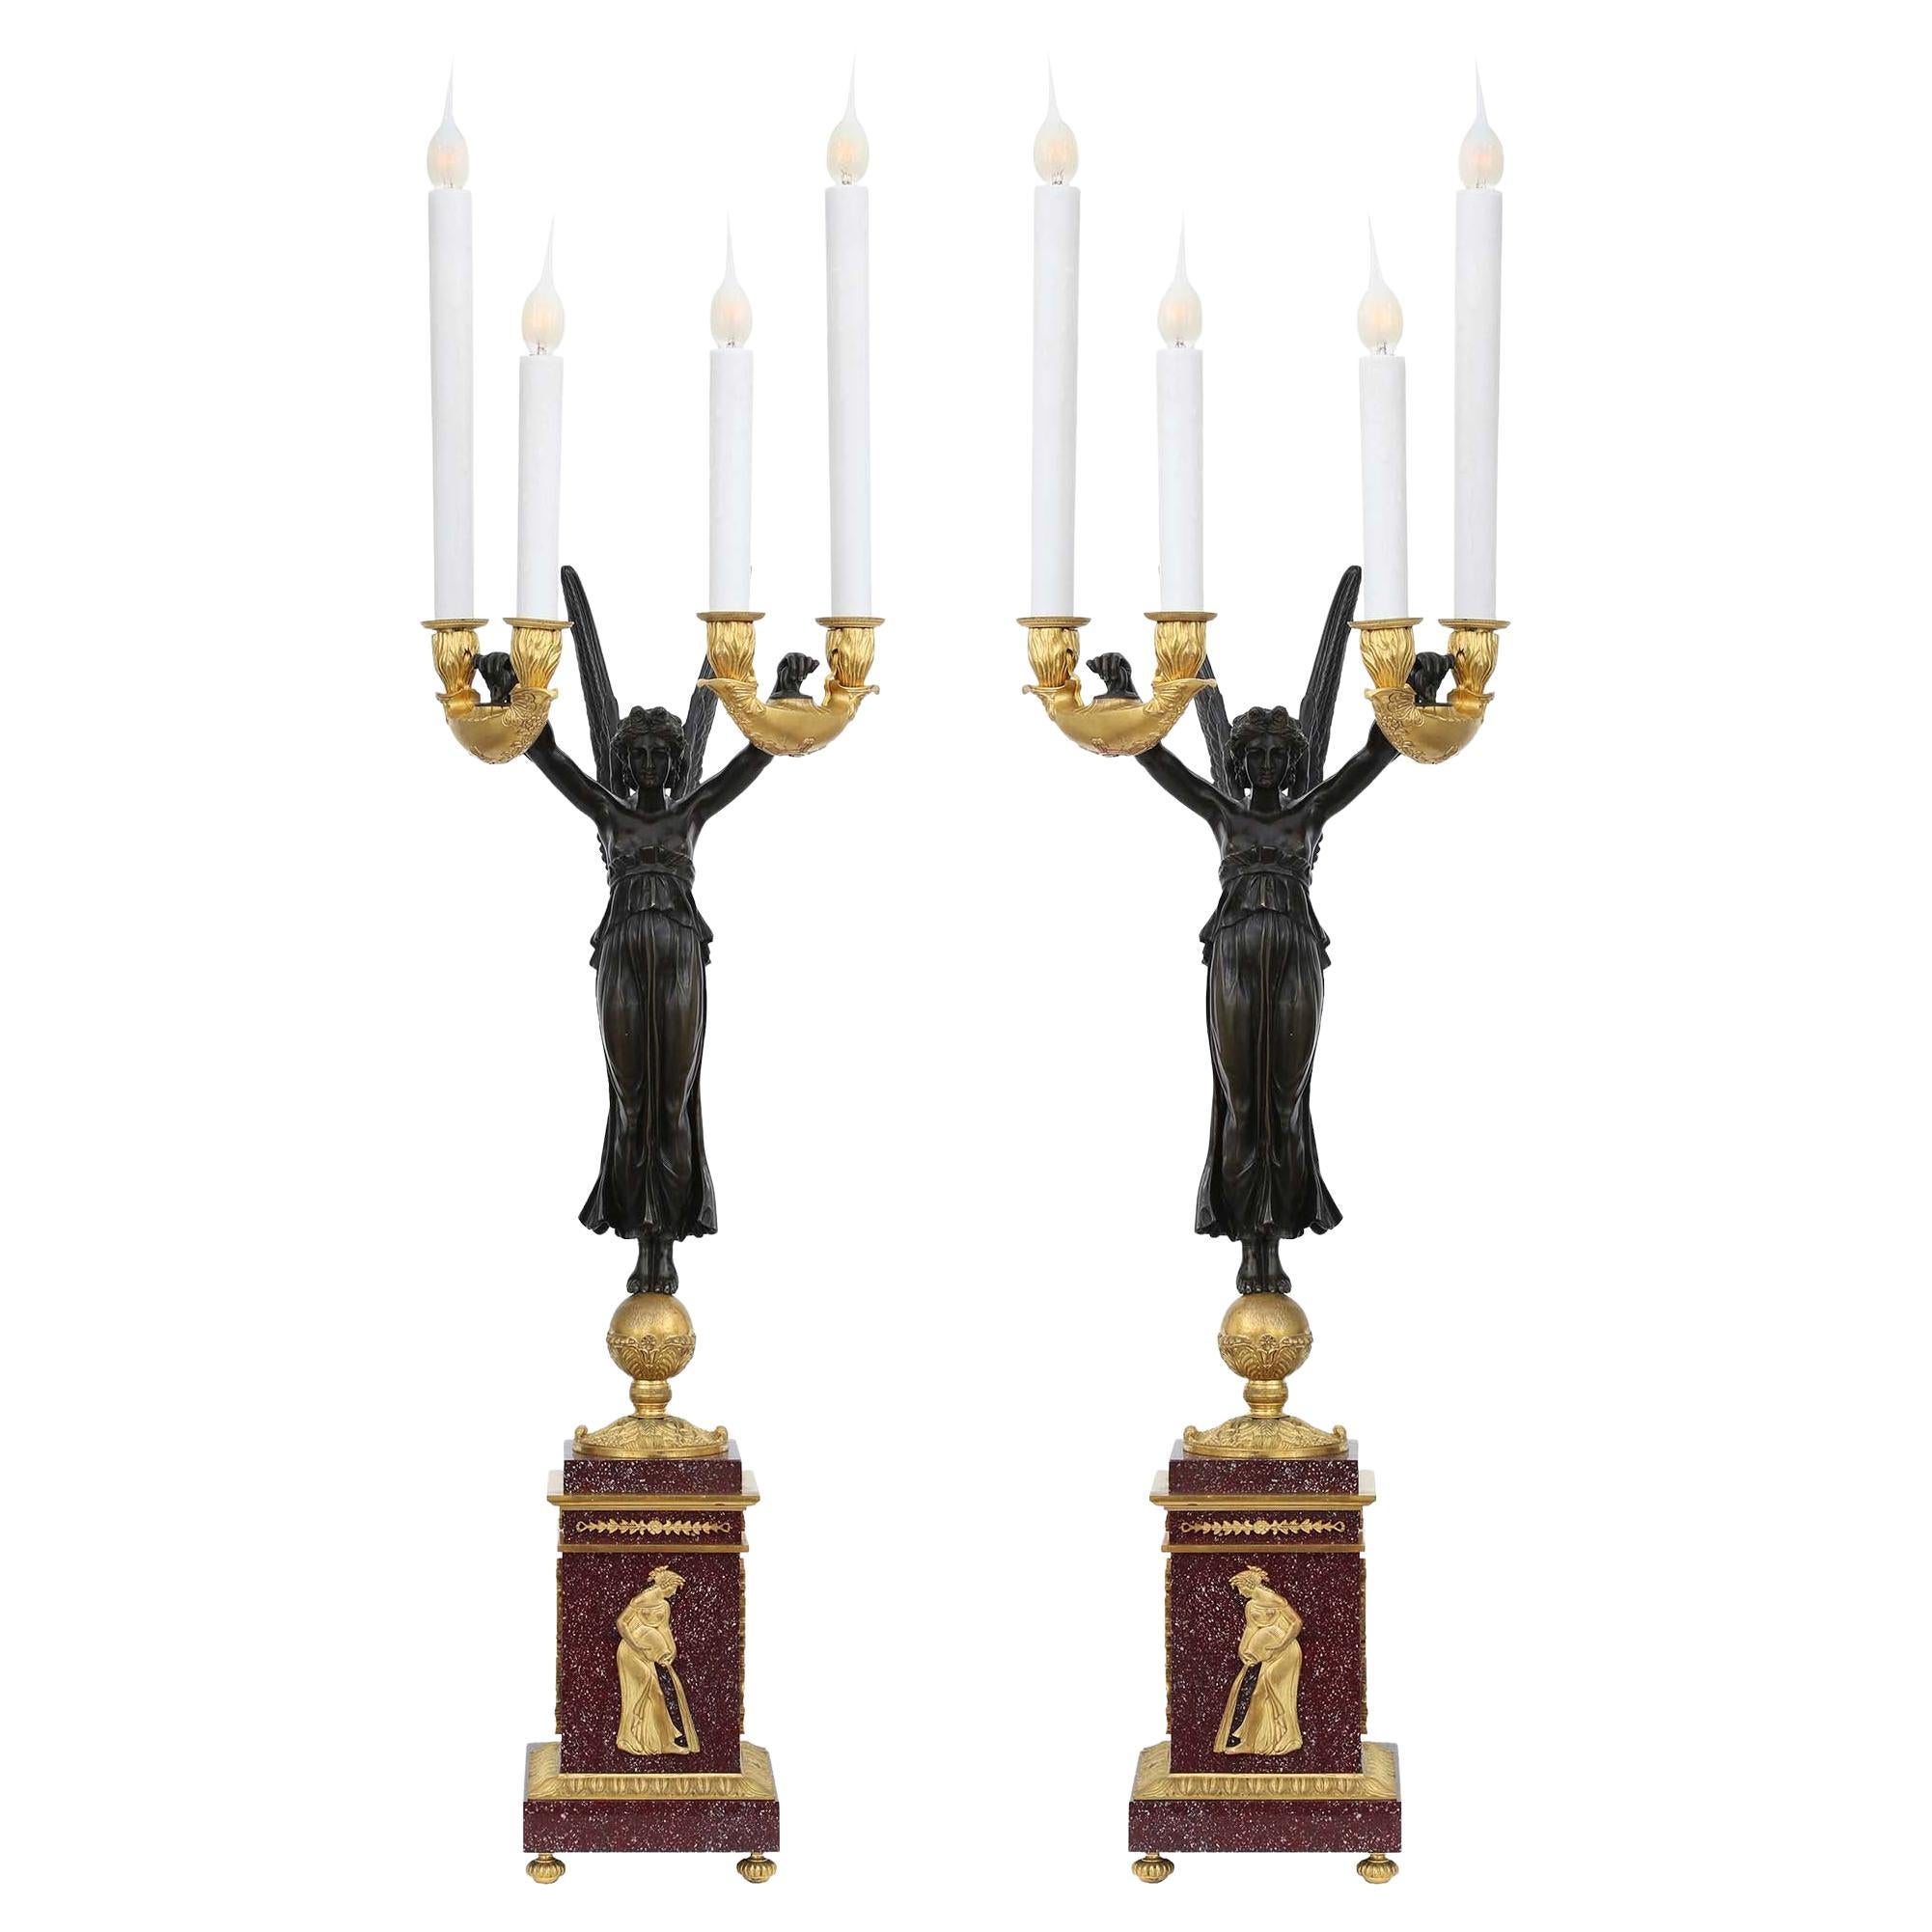 Pair of French 19th Century Neoclassical Style Candelabras Aux Victoires